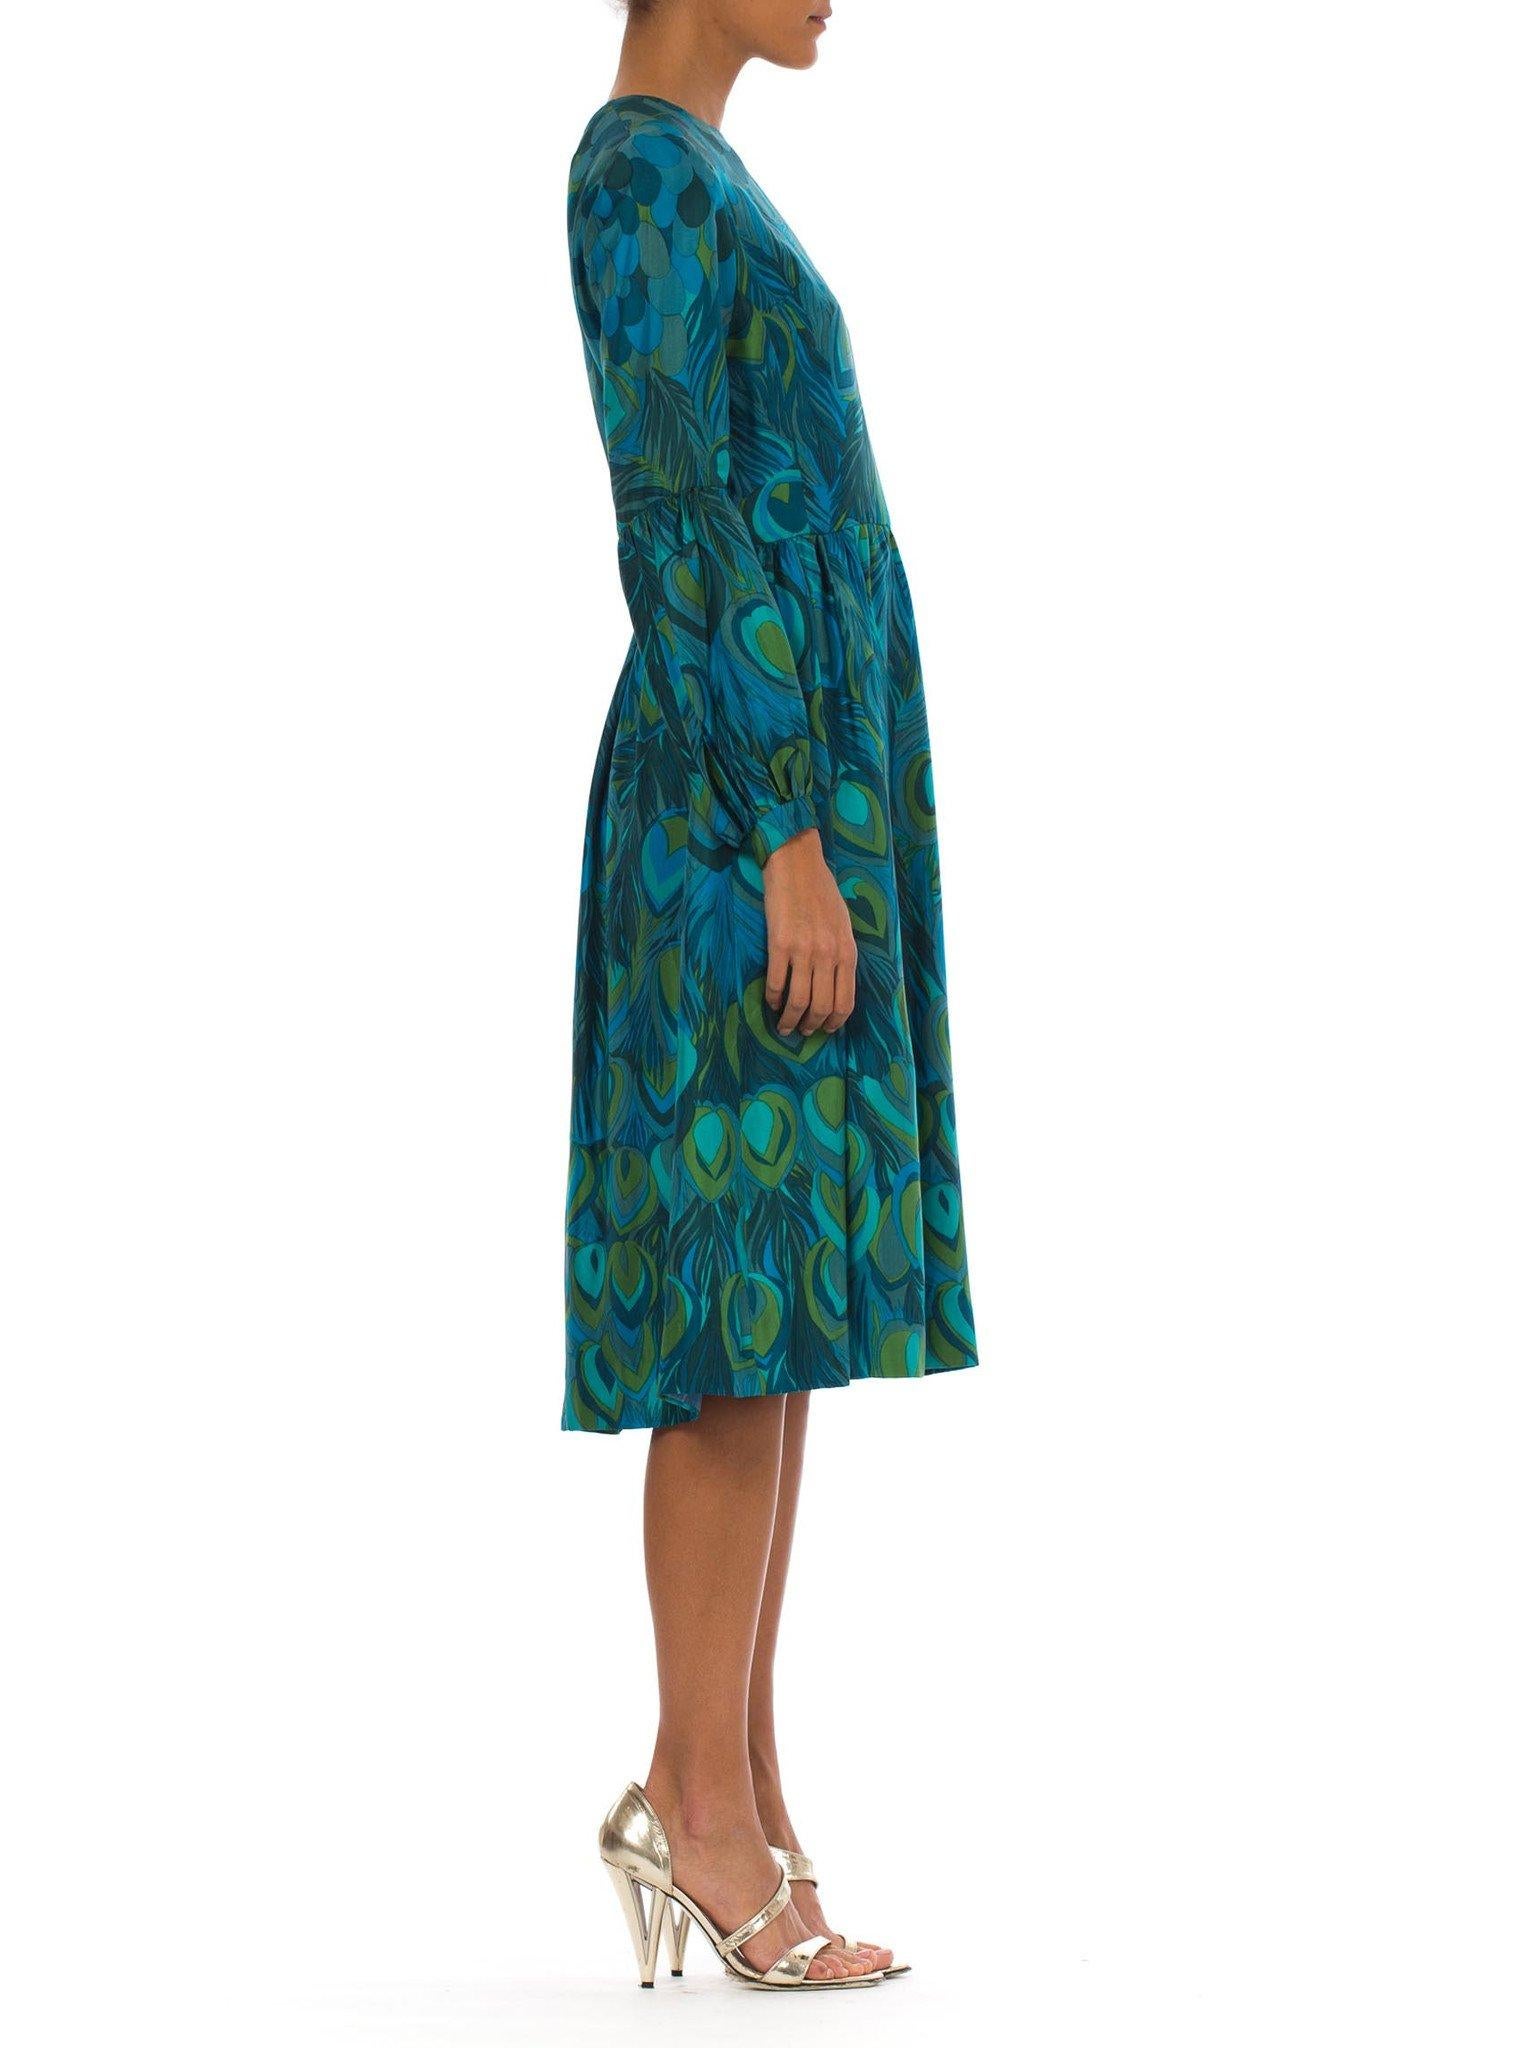 peacock feather print dress